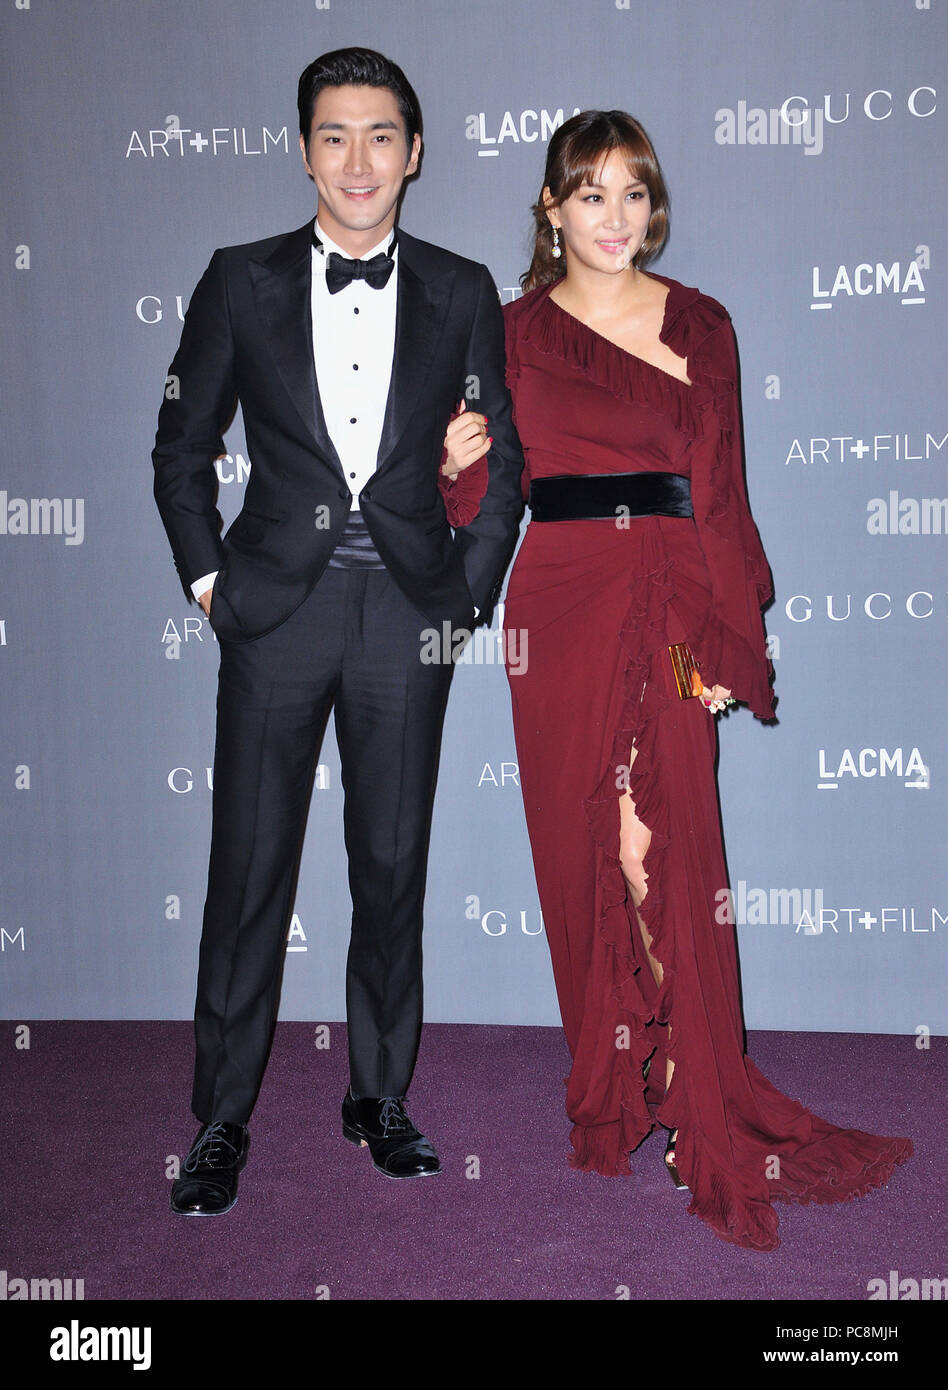 Choi Siwon  at the LACMA 2012 Art Film Gala at the LACMA Museum in Los Angeles.Choi Siwon  141 ------------- Red Carpet Event, Vertical, USA, Film Industry, Celebrities,  Photography, Bestof, Arts Culture and Entertainment, Topix Celebrities fashion /  Vertical, Best of, Event in Hollywood Life - California,  Red Carpet and backstage, USA, Film Industry, Celebrities,  movie celebrities, TV celebrities, Music celebrities, Photography, Bestof, Arts Culture and Entertainment,  Topix, vertical,  family from from the year , 2012, inquiry tsuni@Gamma-USA.com Husband and wife Stock Photo